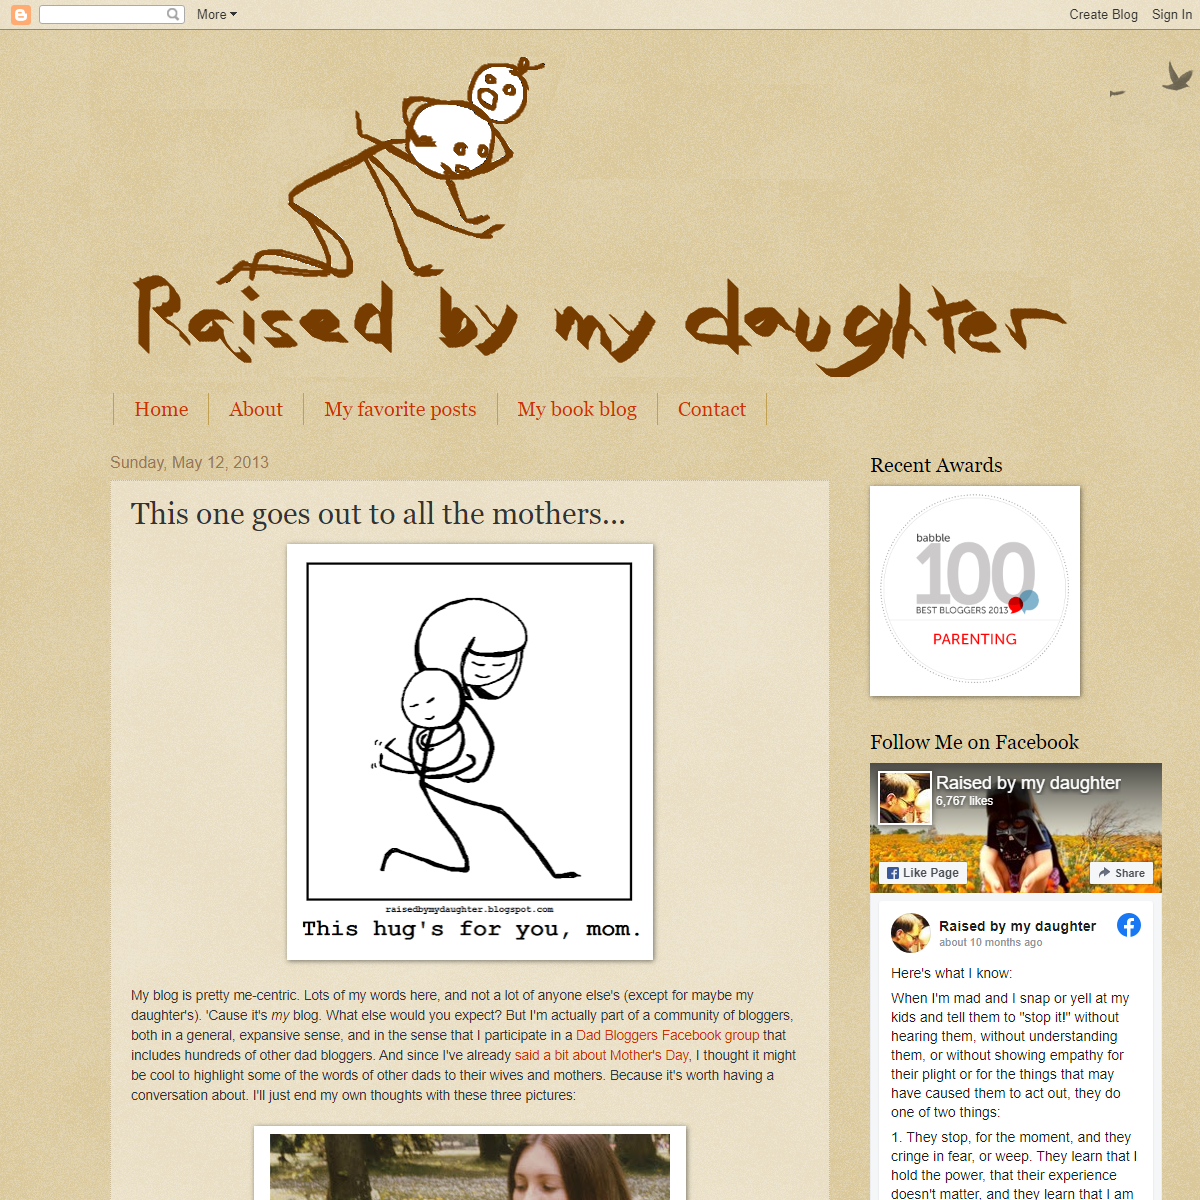 A complete backup of https://raisedbymydaughter.blogspot.com/2013/05/this-one-goes-out-to-all-mothers.html